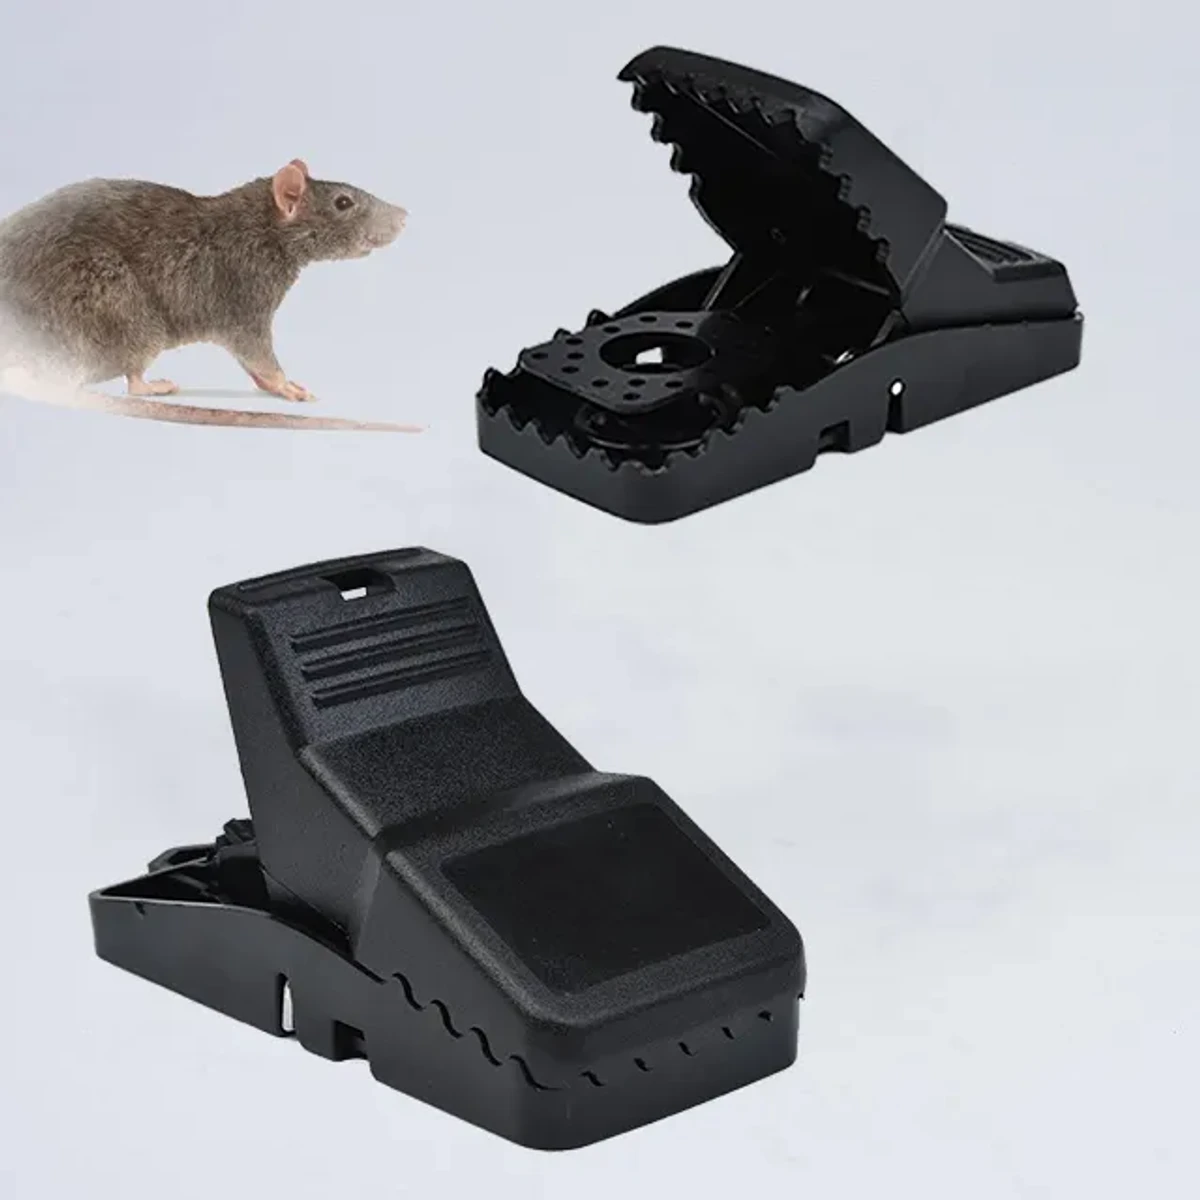 4 PCS RAT TRAP FOR HOUSE AND OFFICE